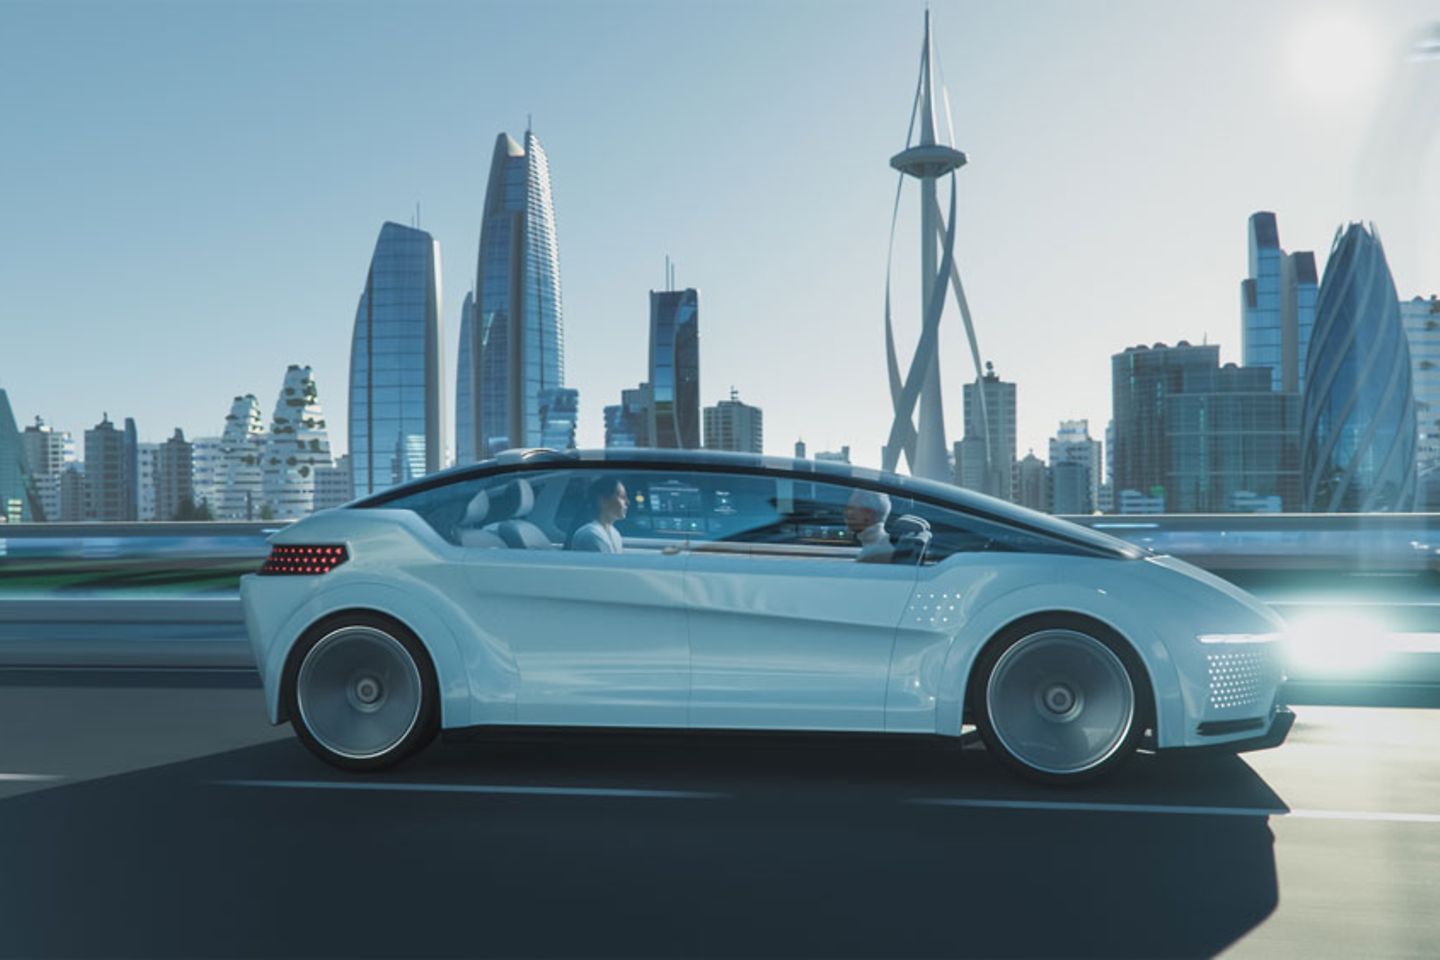 Shot of a futuristic self-driving car moving on a highway with skyscrapers in background